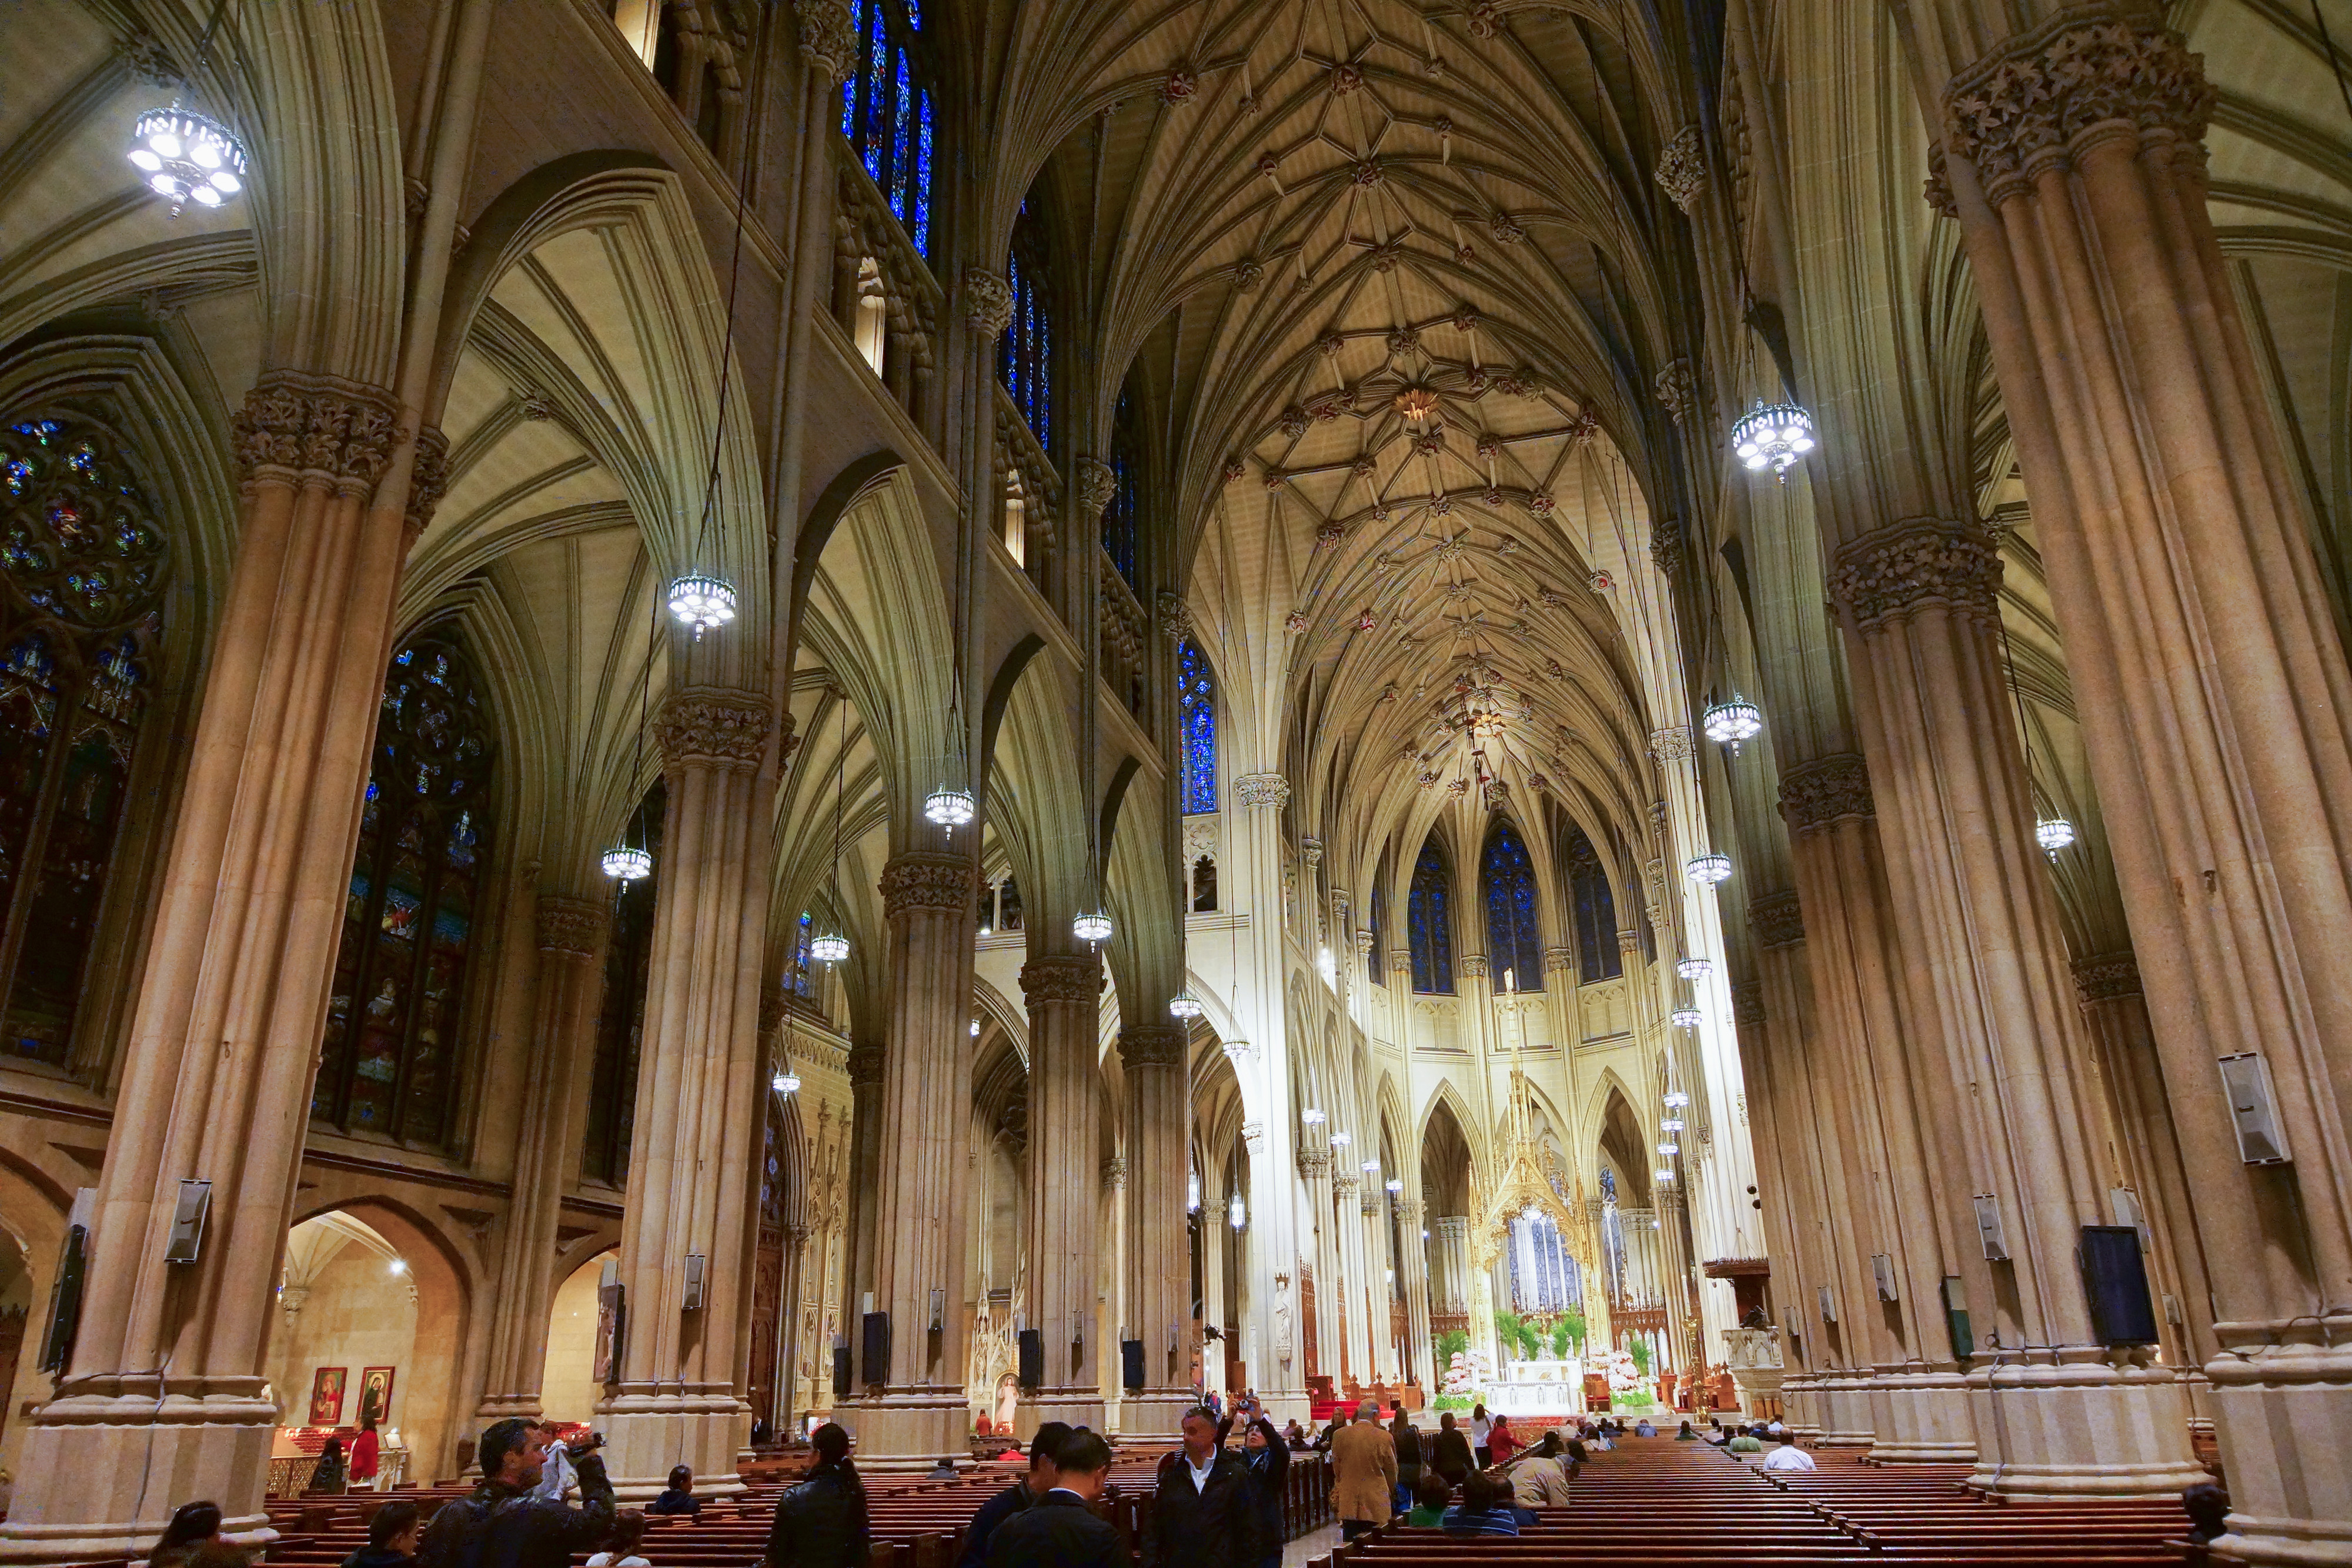 File:NYC - St. Patrick's Cathedral - Interior.JPG - Wikimedia Commons